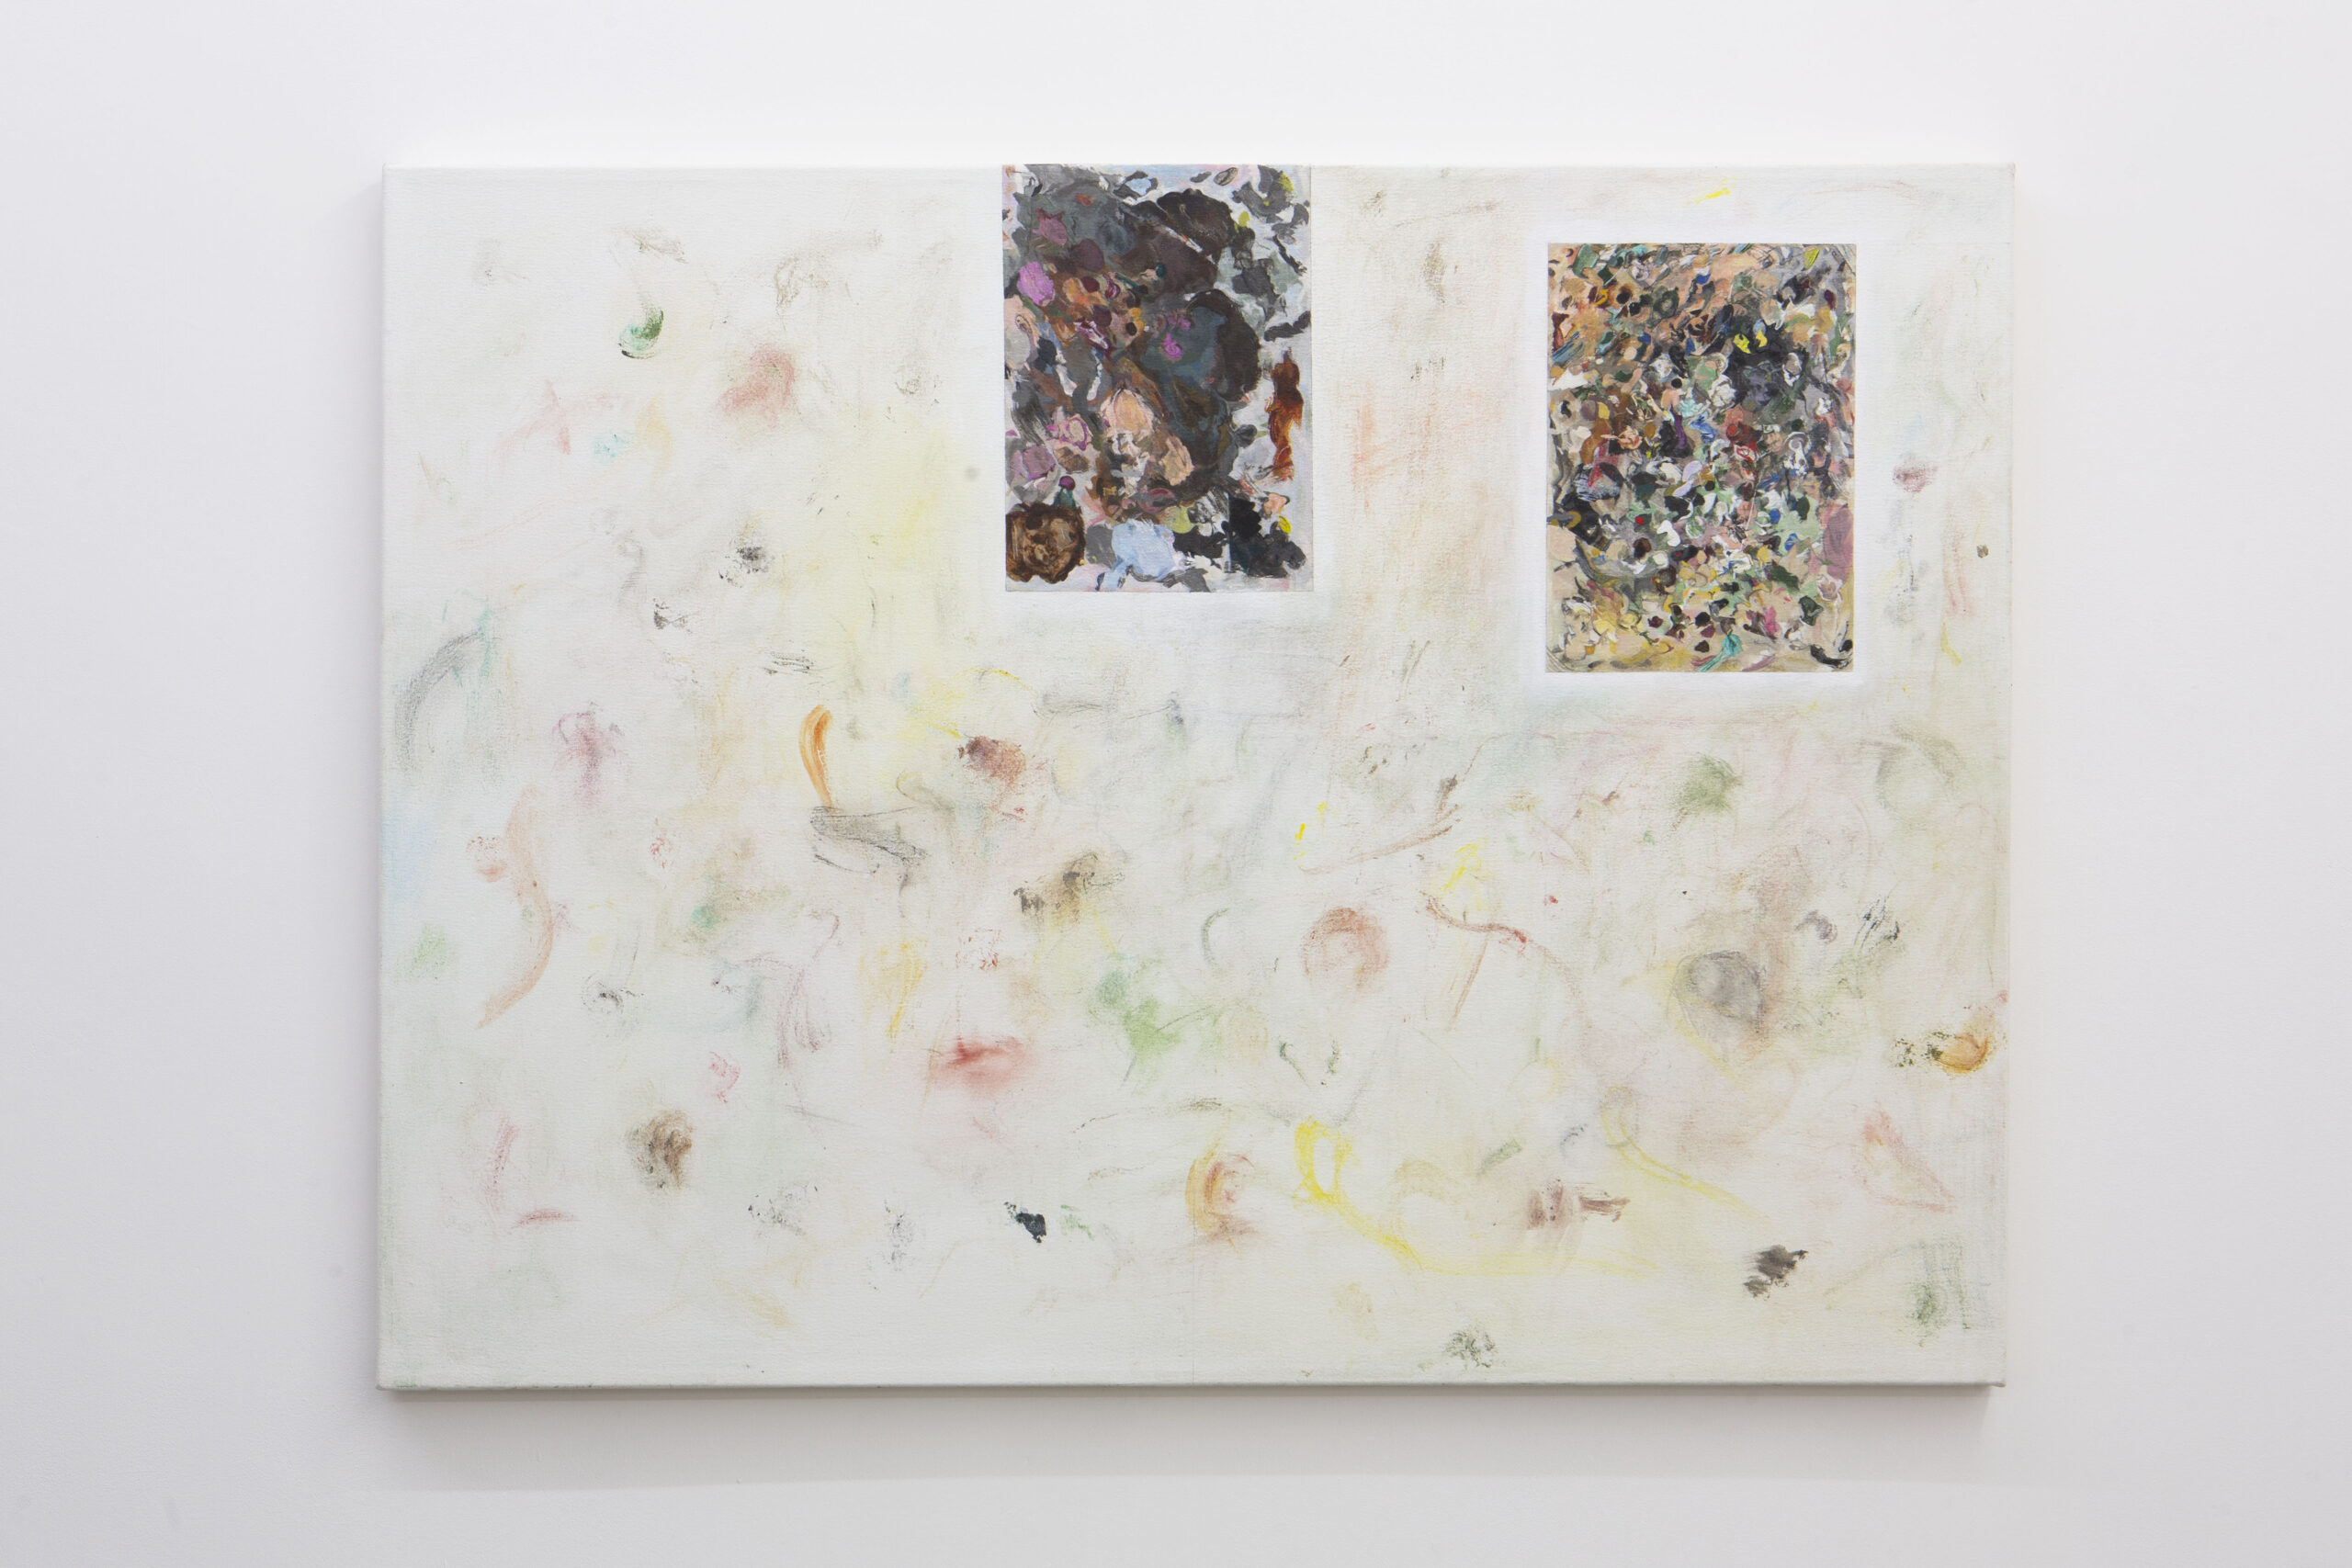 Stuart Brisley: Palettes from The Museum of Ordure (2020) Acrylic on gesso on canvas 92 cm x 122 cm